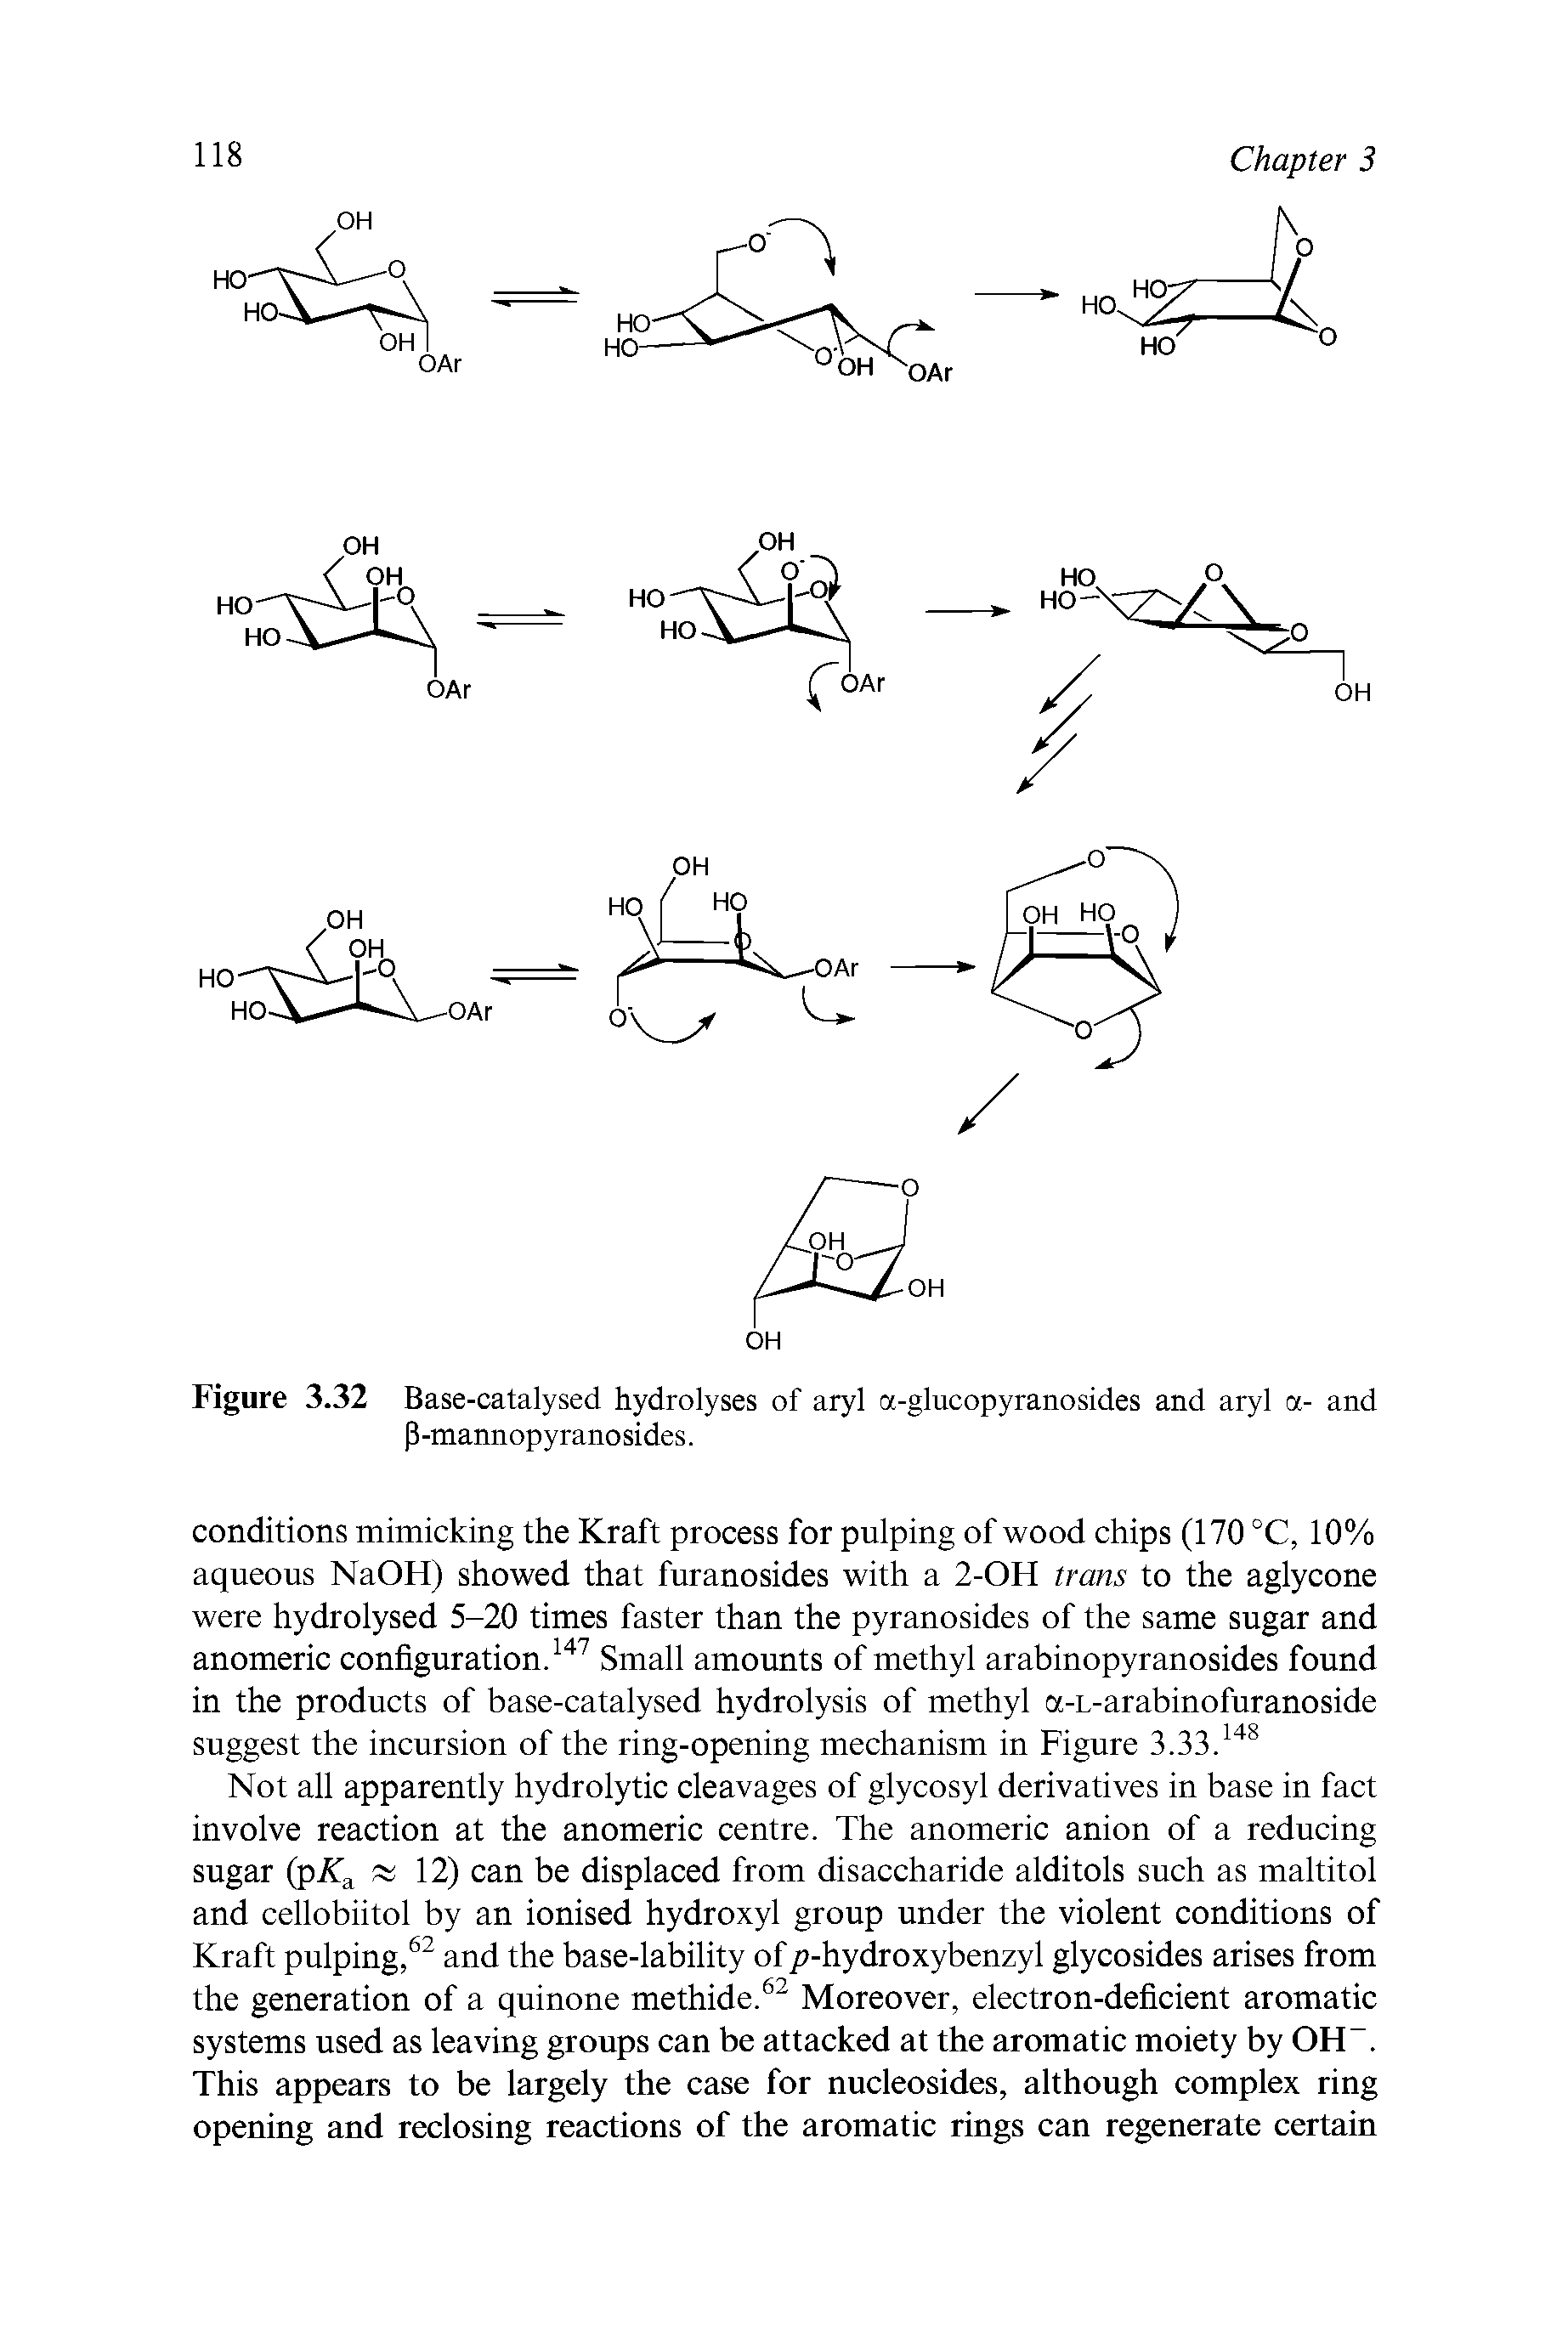 Figure 3.32 Base-catalysed hydrolyses of aryl a-glucopyranosides and aryl a- and P-mannopyranosides.